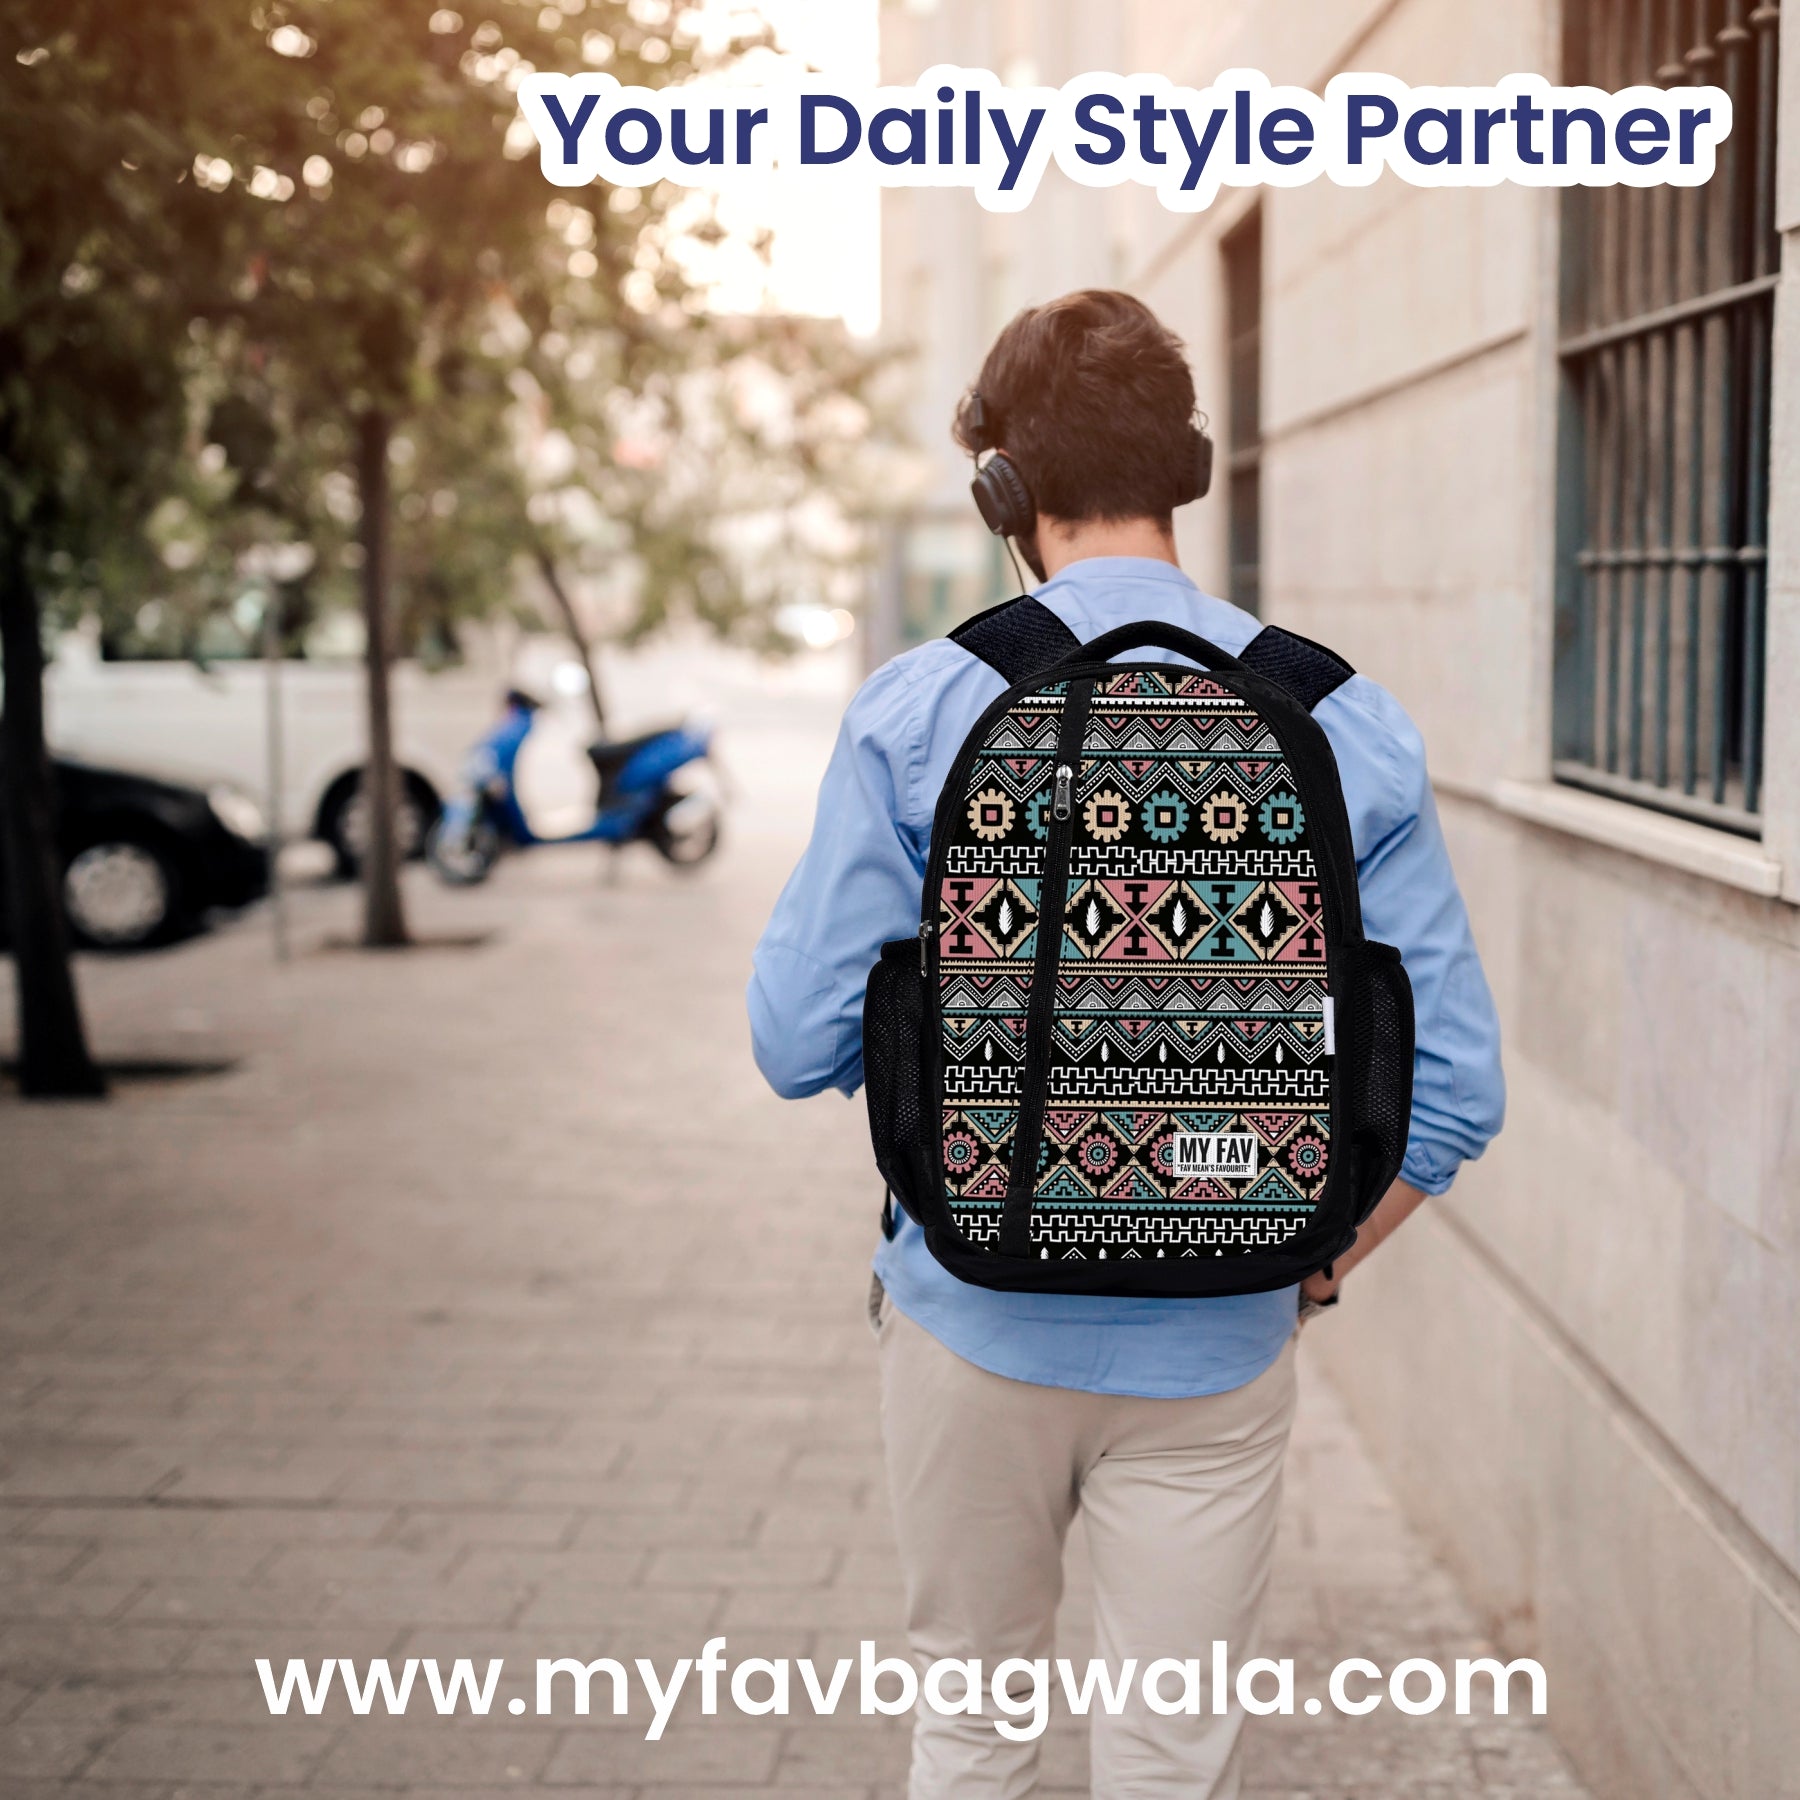 Backpacks are an essential part of our daily lives